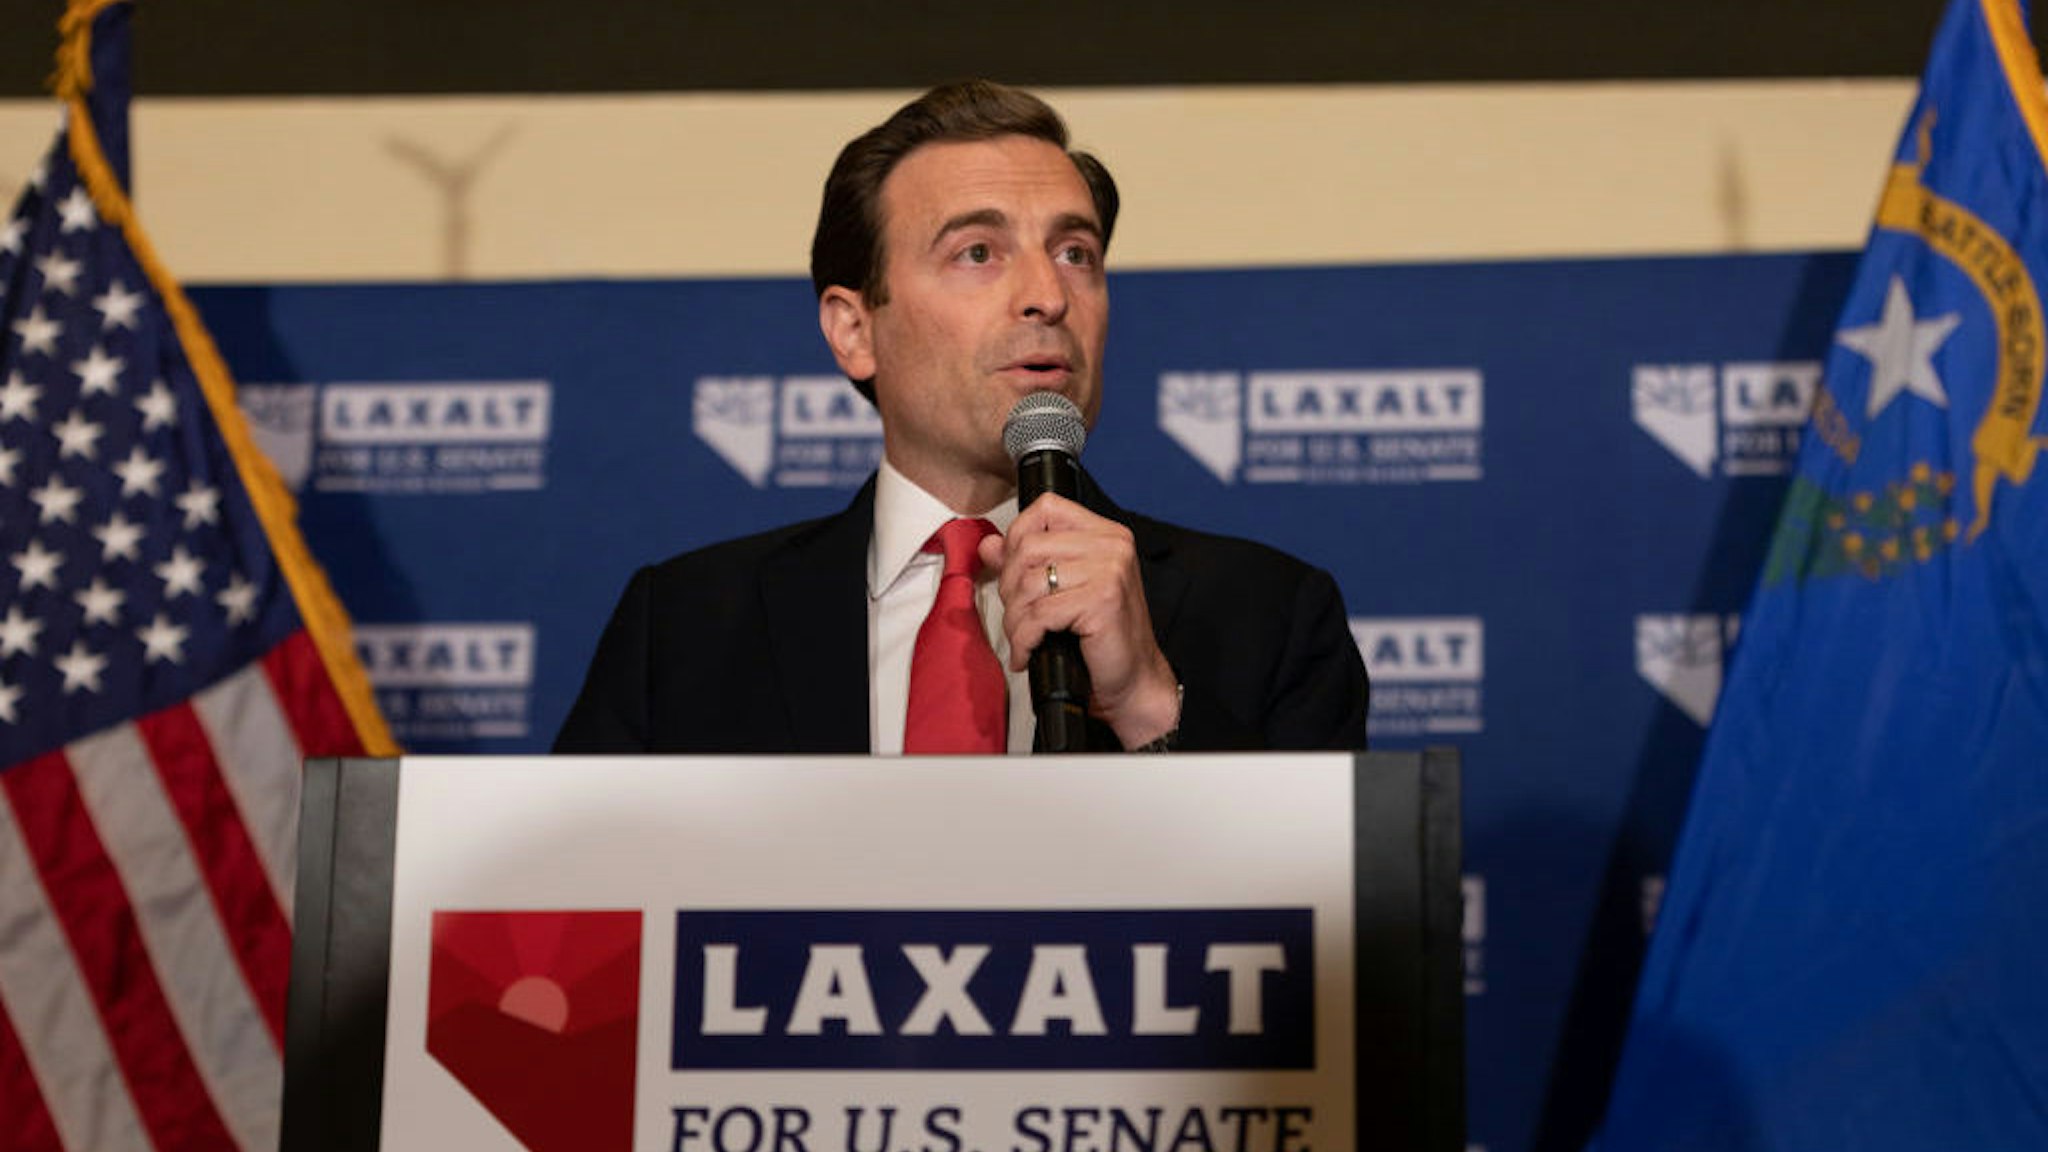 RENO, NV - JUNE 14: Adam Laxalt speaks to a crowd at an election night event on June 14, 2022 in Reno, Nevada. The Nevada primary is attracting national attention as Republican Senate candidates prepare to challenge incumbent U.S. Sen. Catherine Cortez-Masto (D-NV) in November. (Photo by Trevor Bexon/Getty Images)